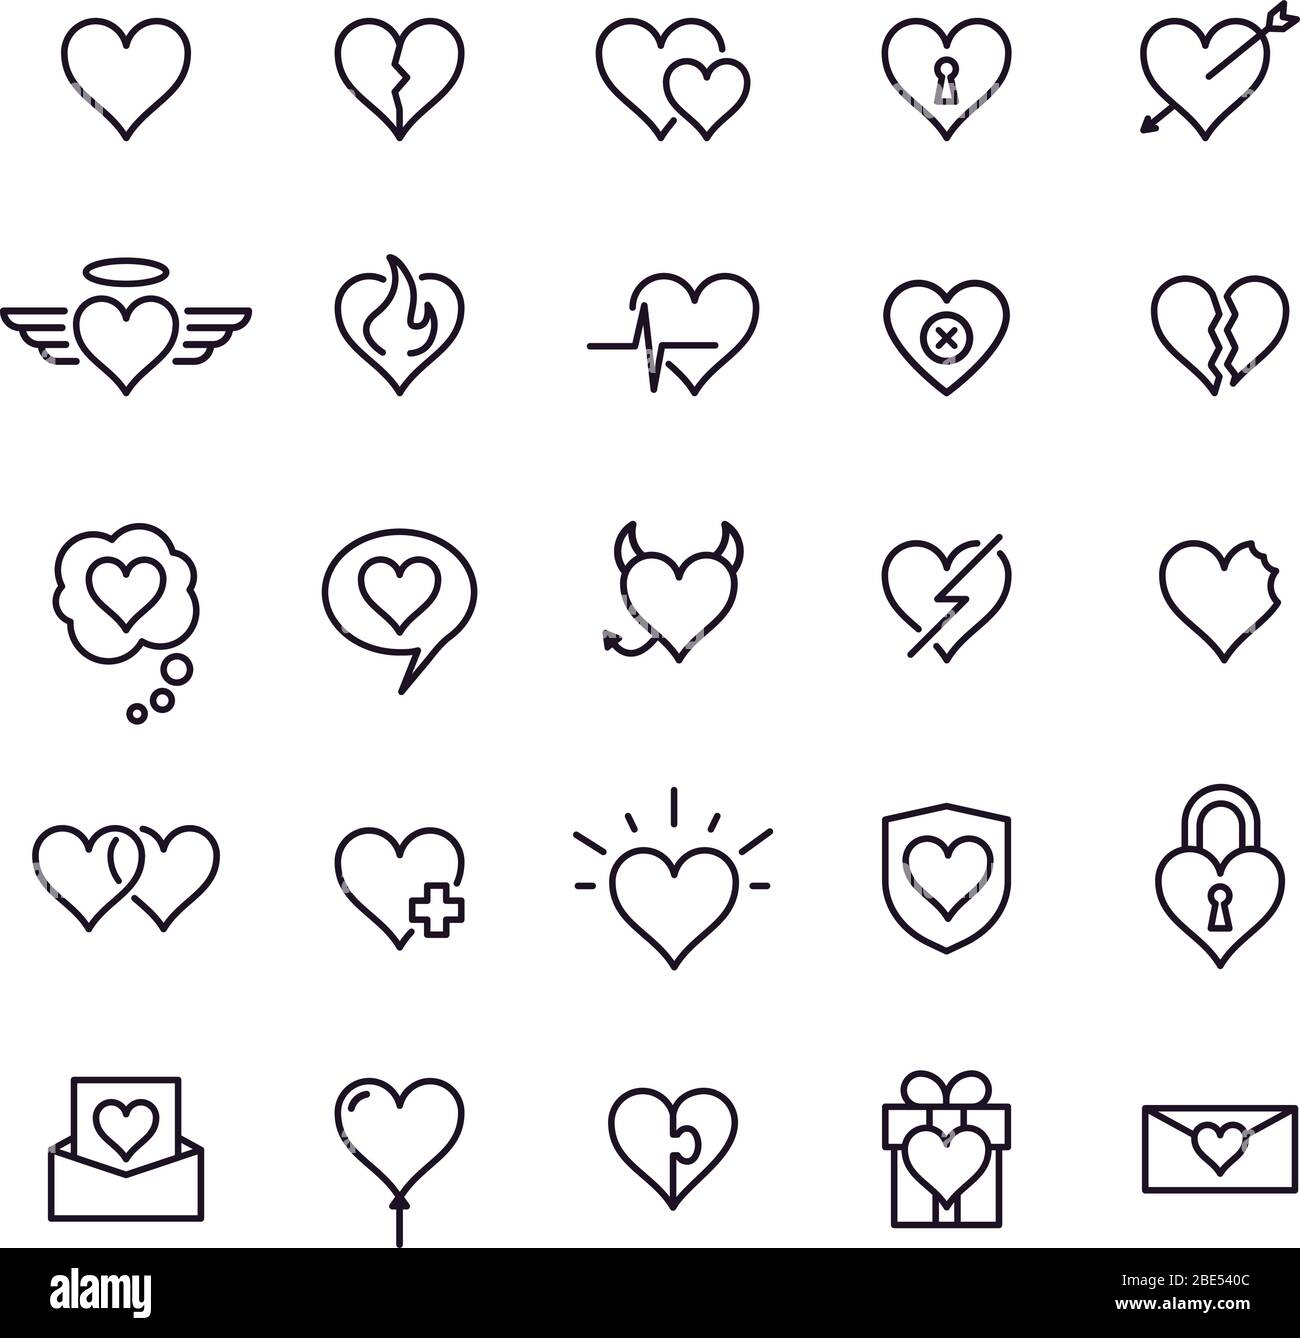 Heart line icons. Styling heart decoration elements, love and friendship symbols and outline lovely pictograms vector isolated icons set. Feelings Stock Vector